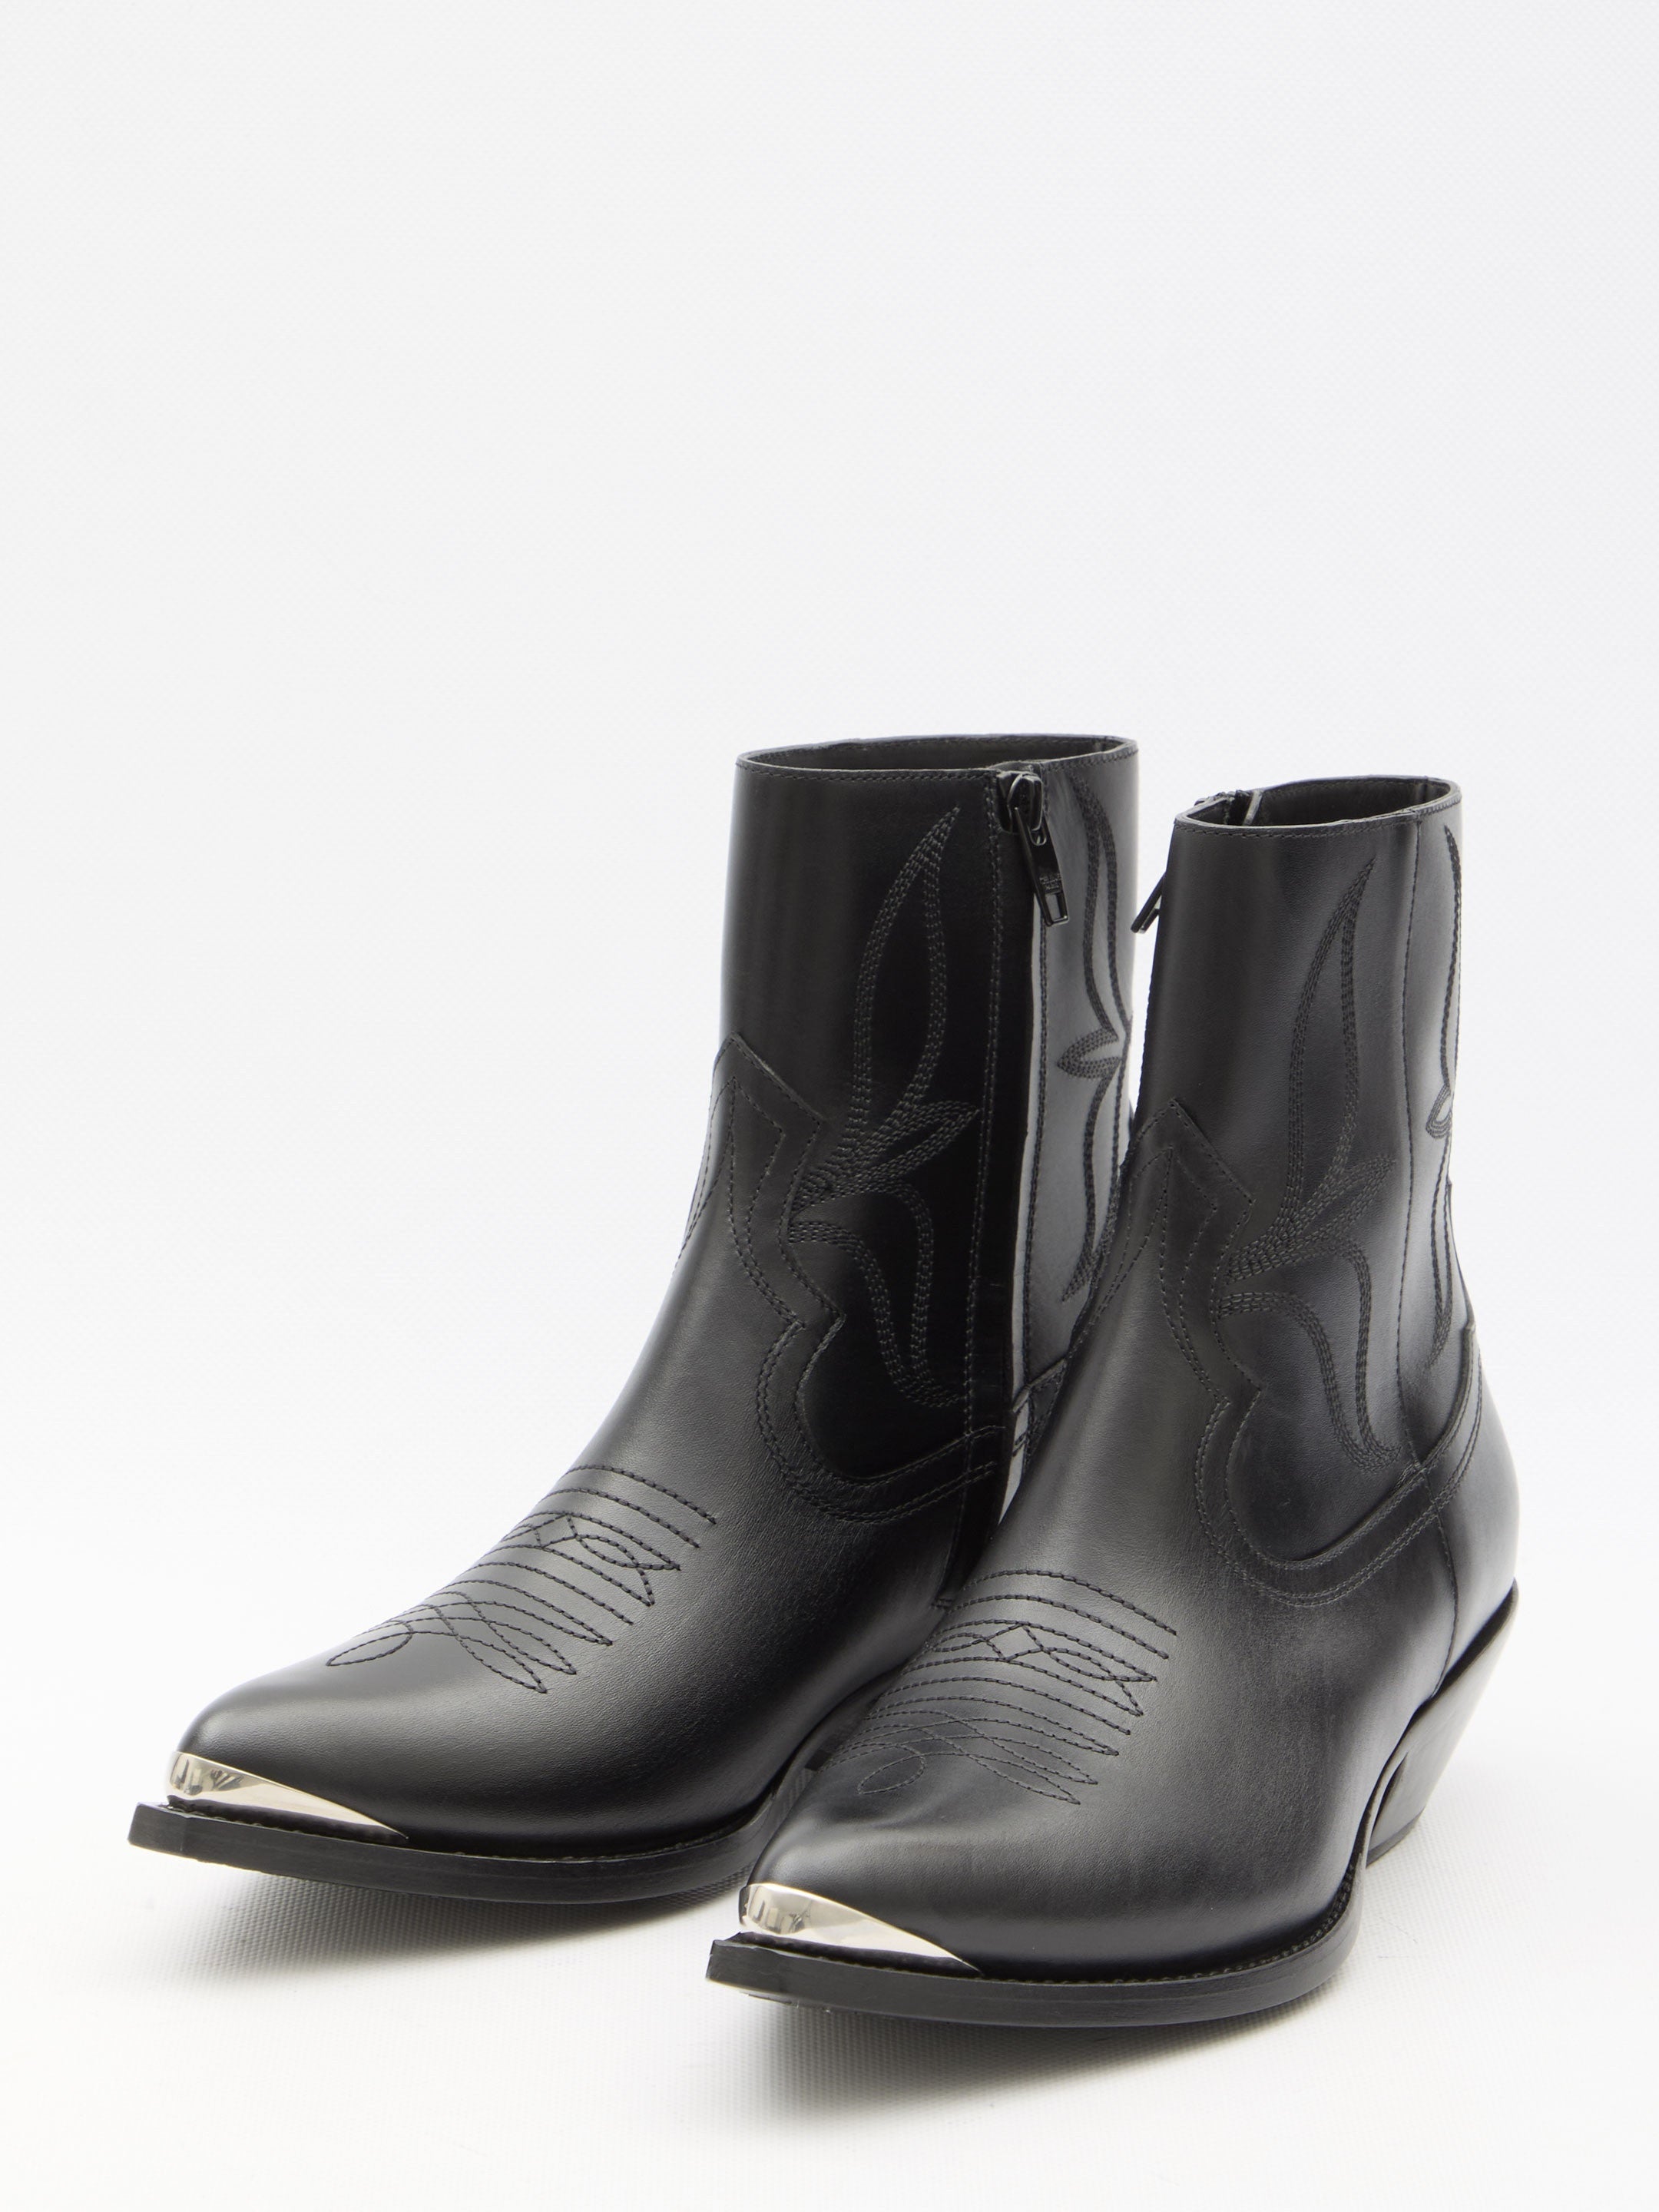 Celine Ranch boots